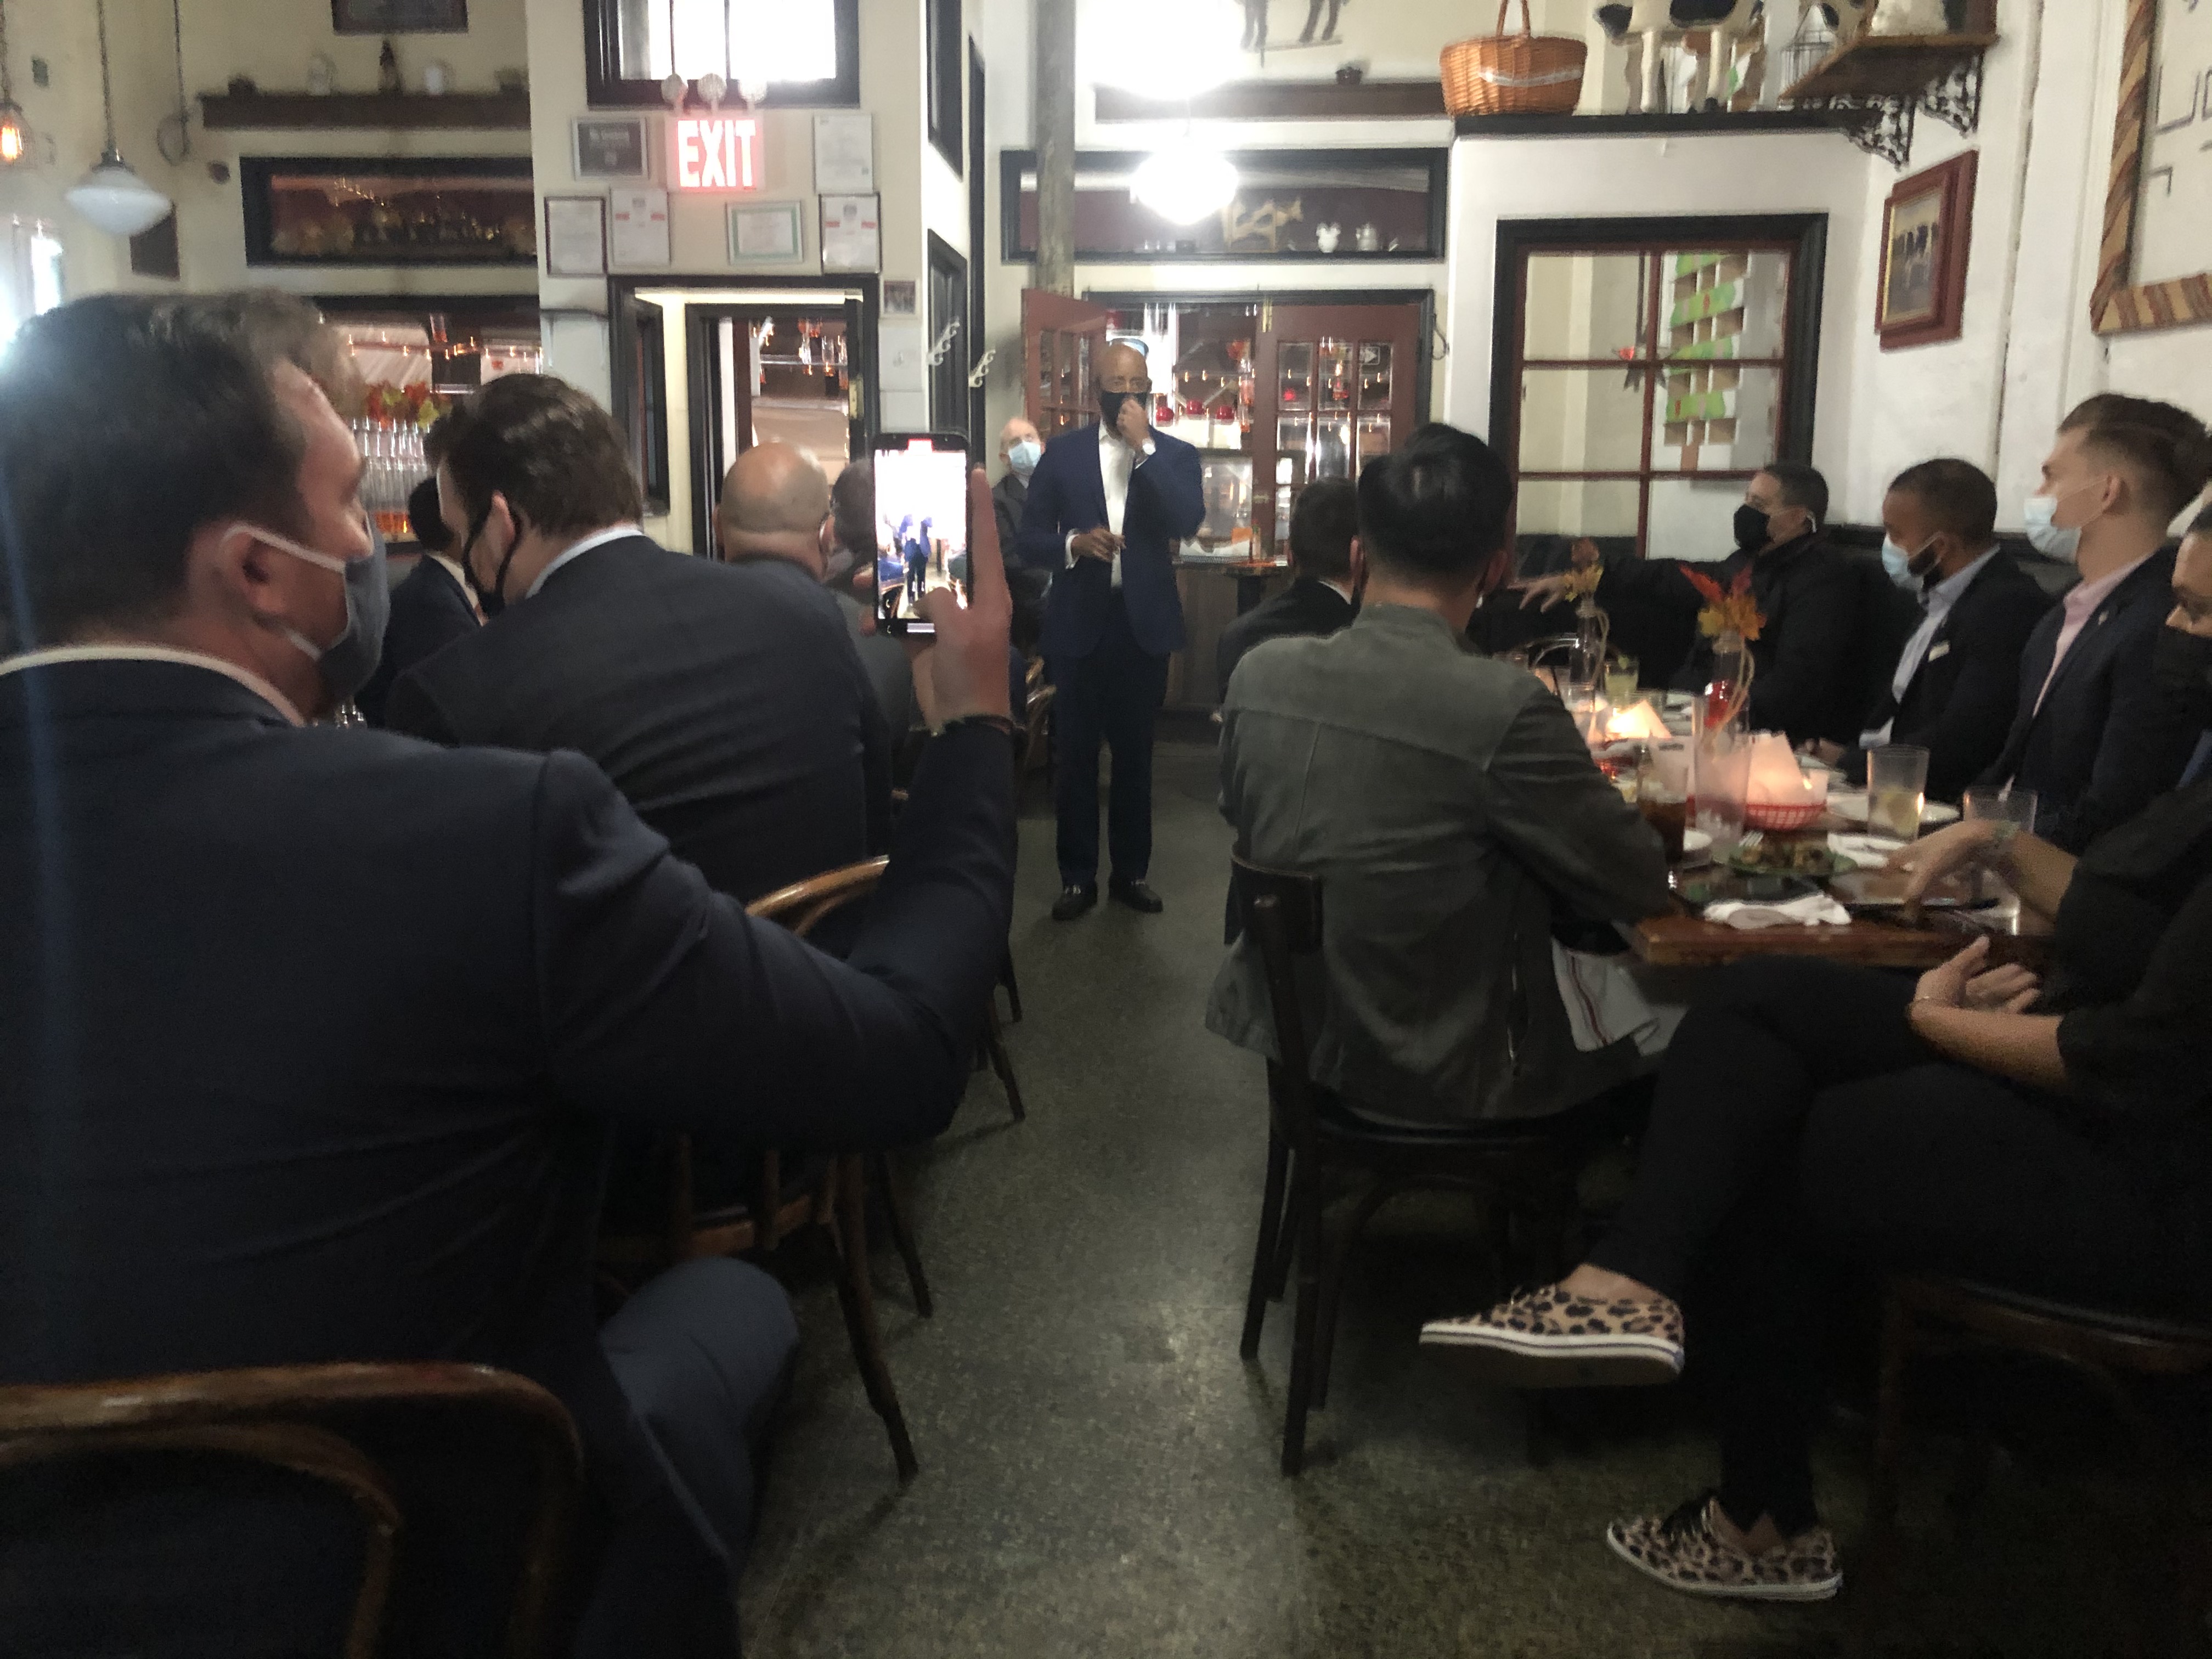 Brooklyn Borough President Eric Adams stands at the back of a dimly lit restaurant in the Upper West Side speaking to attendees seated at tables at a fundraiser he hosted.